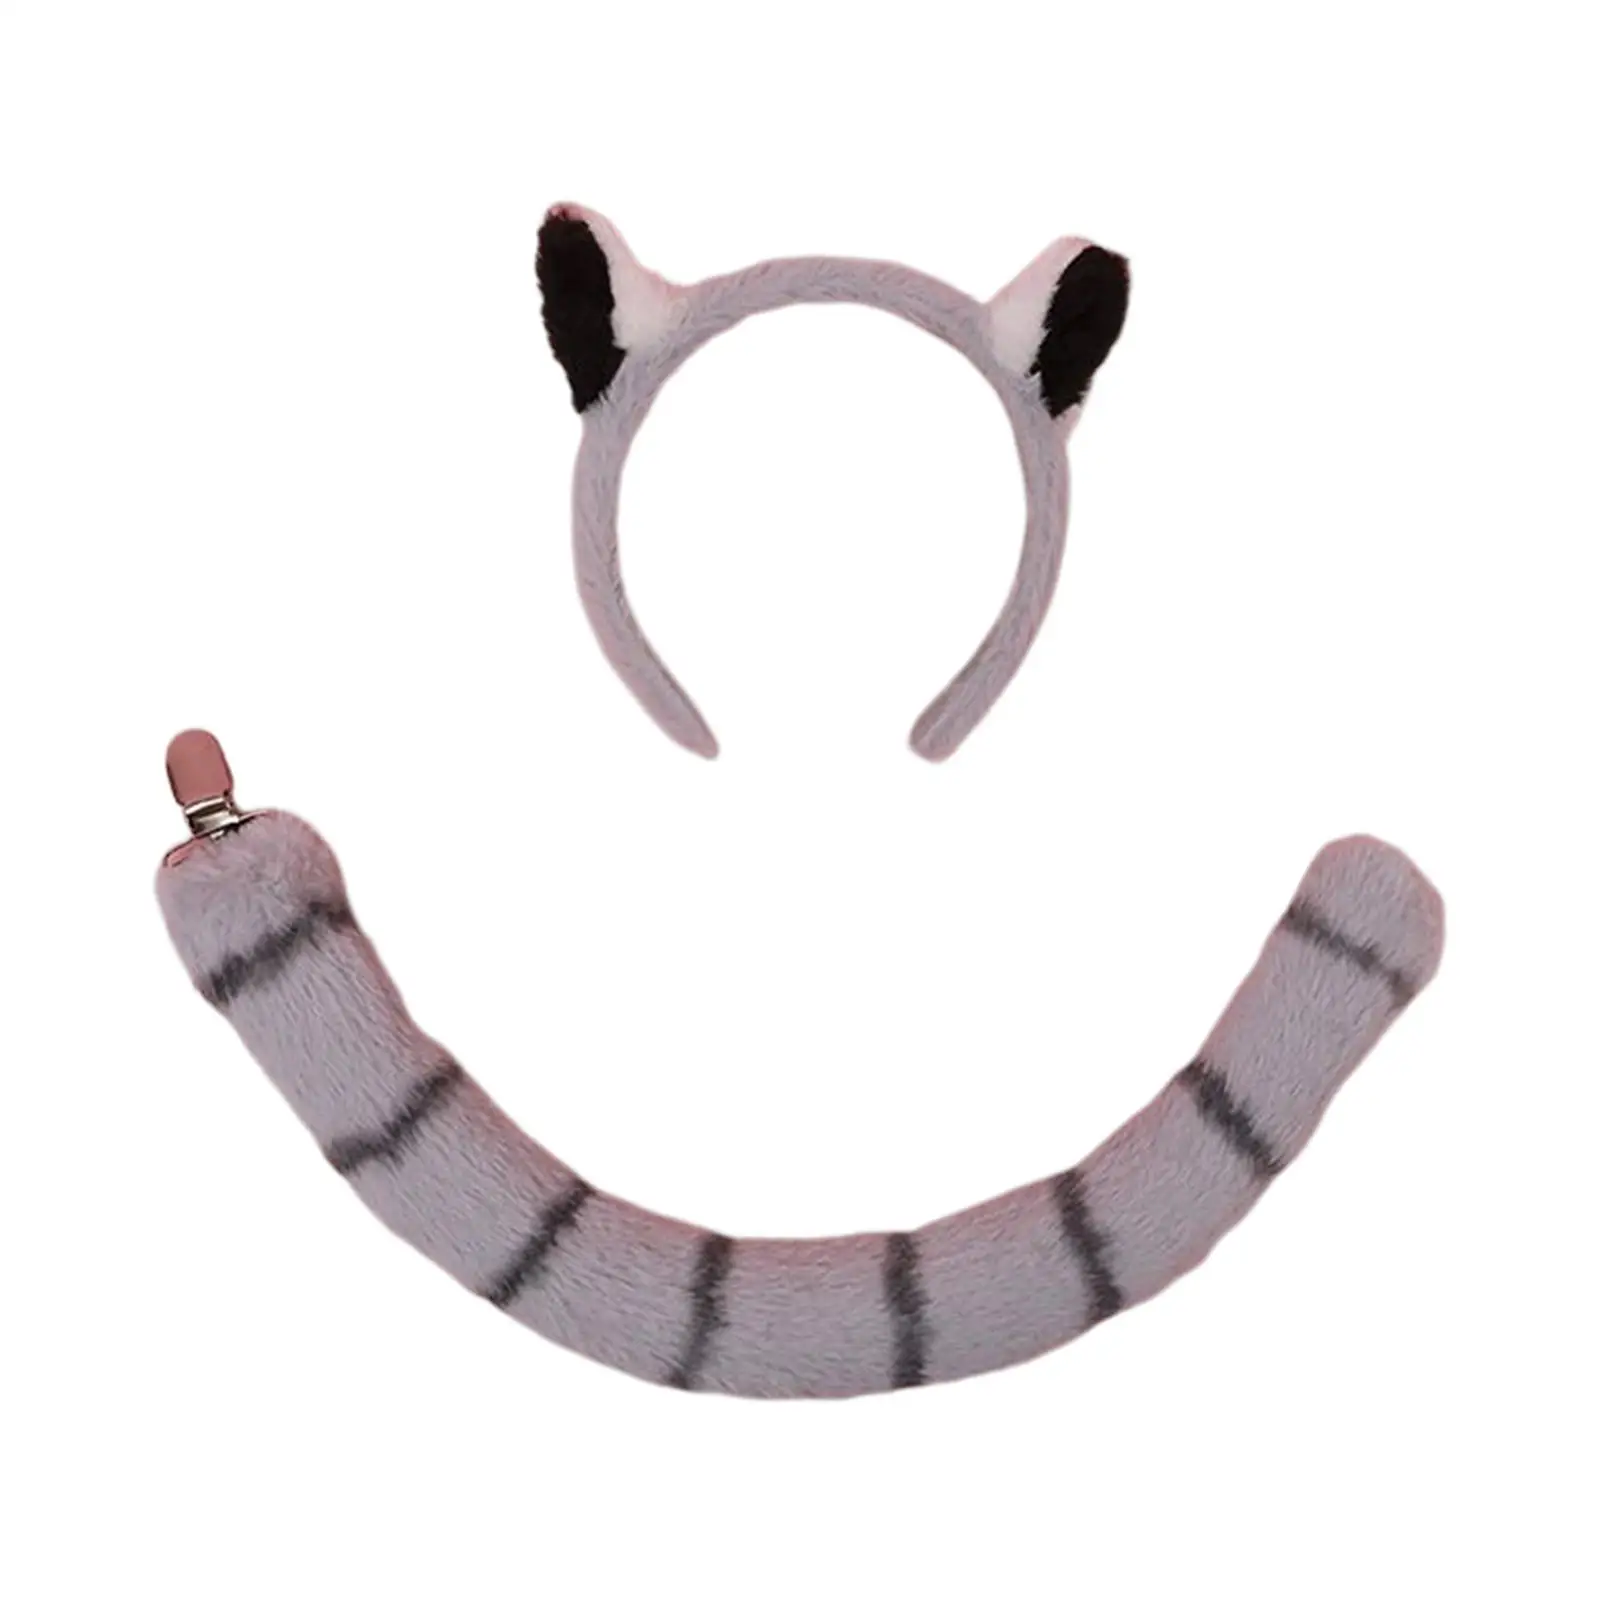 Raccoon Ears and Tail Set Costume Fancy Dress Stage Shows Headpiece Dress up